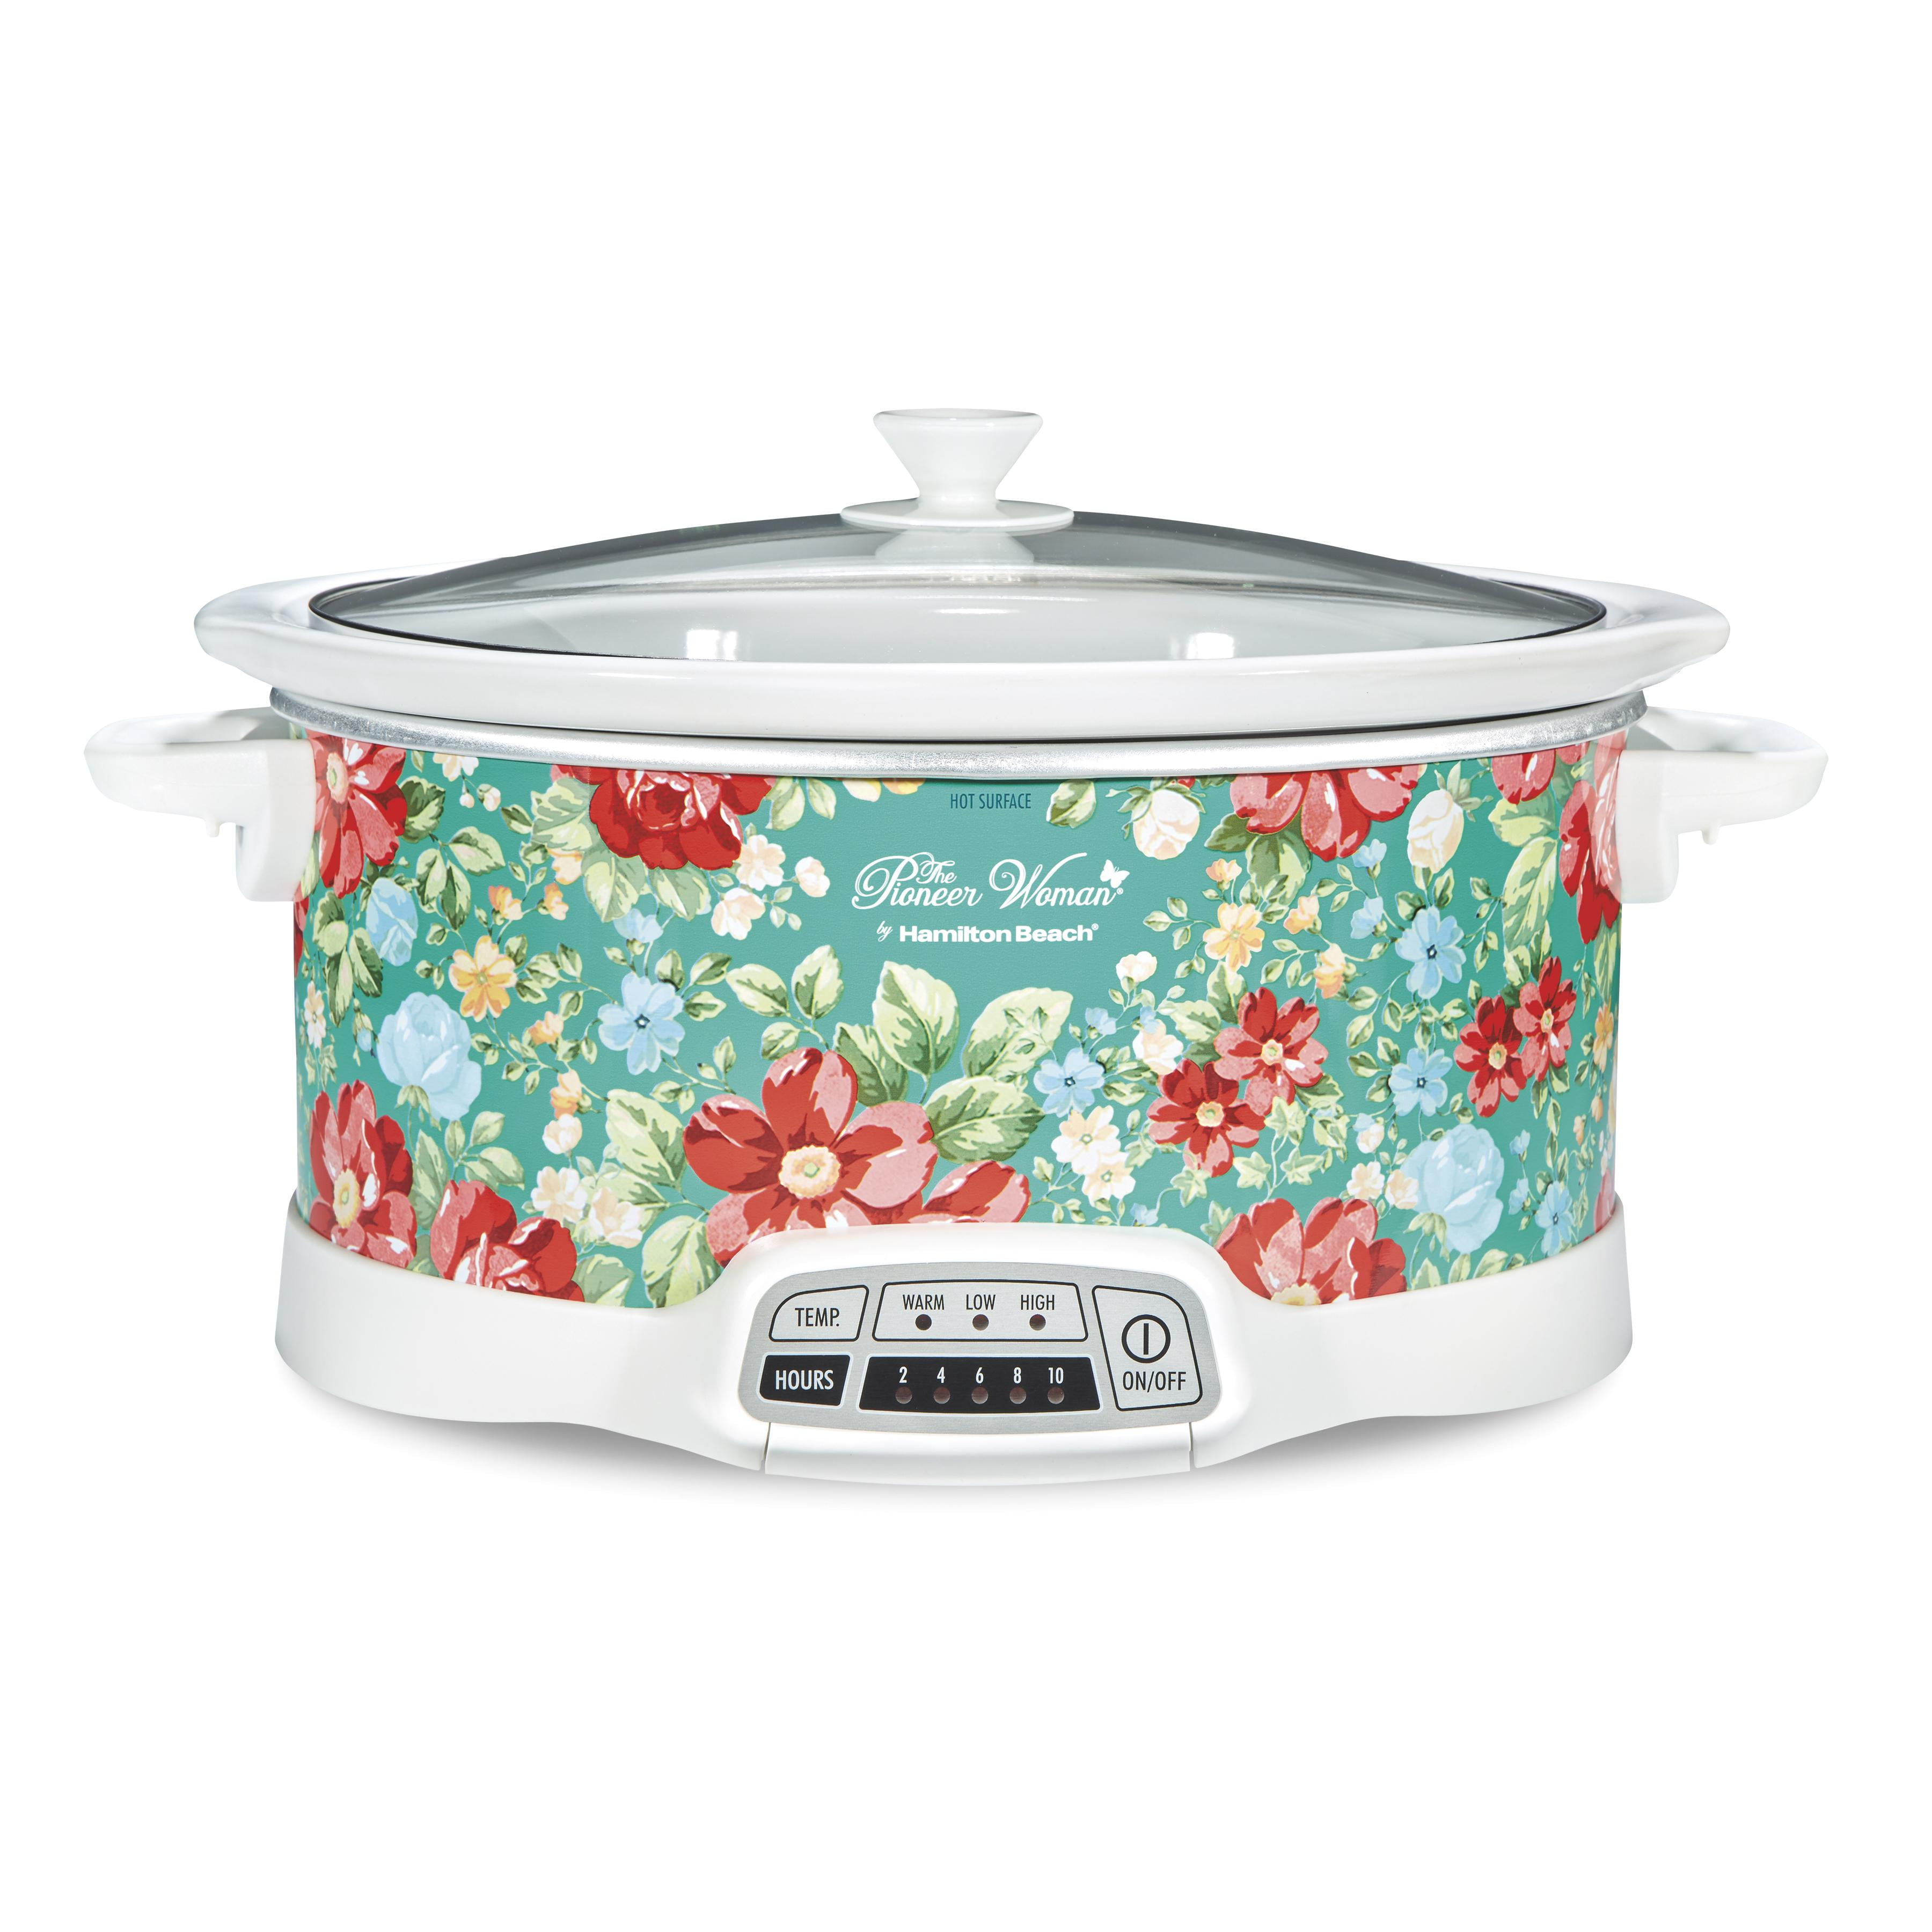 The Pioneer Woman Just Launched the Prettiest Slow Cookers We